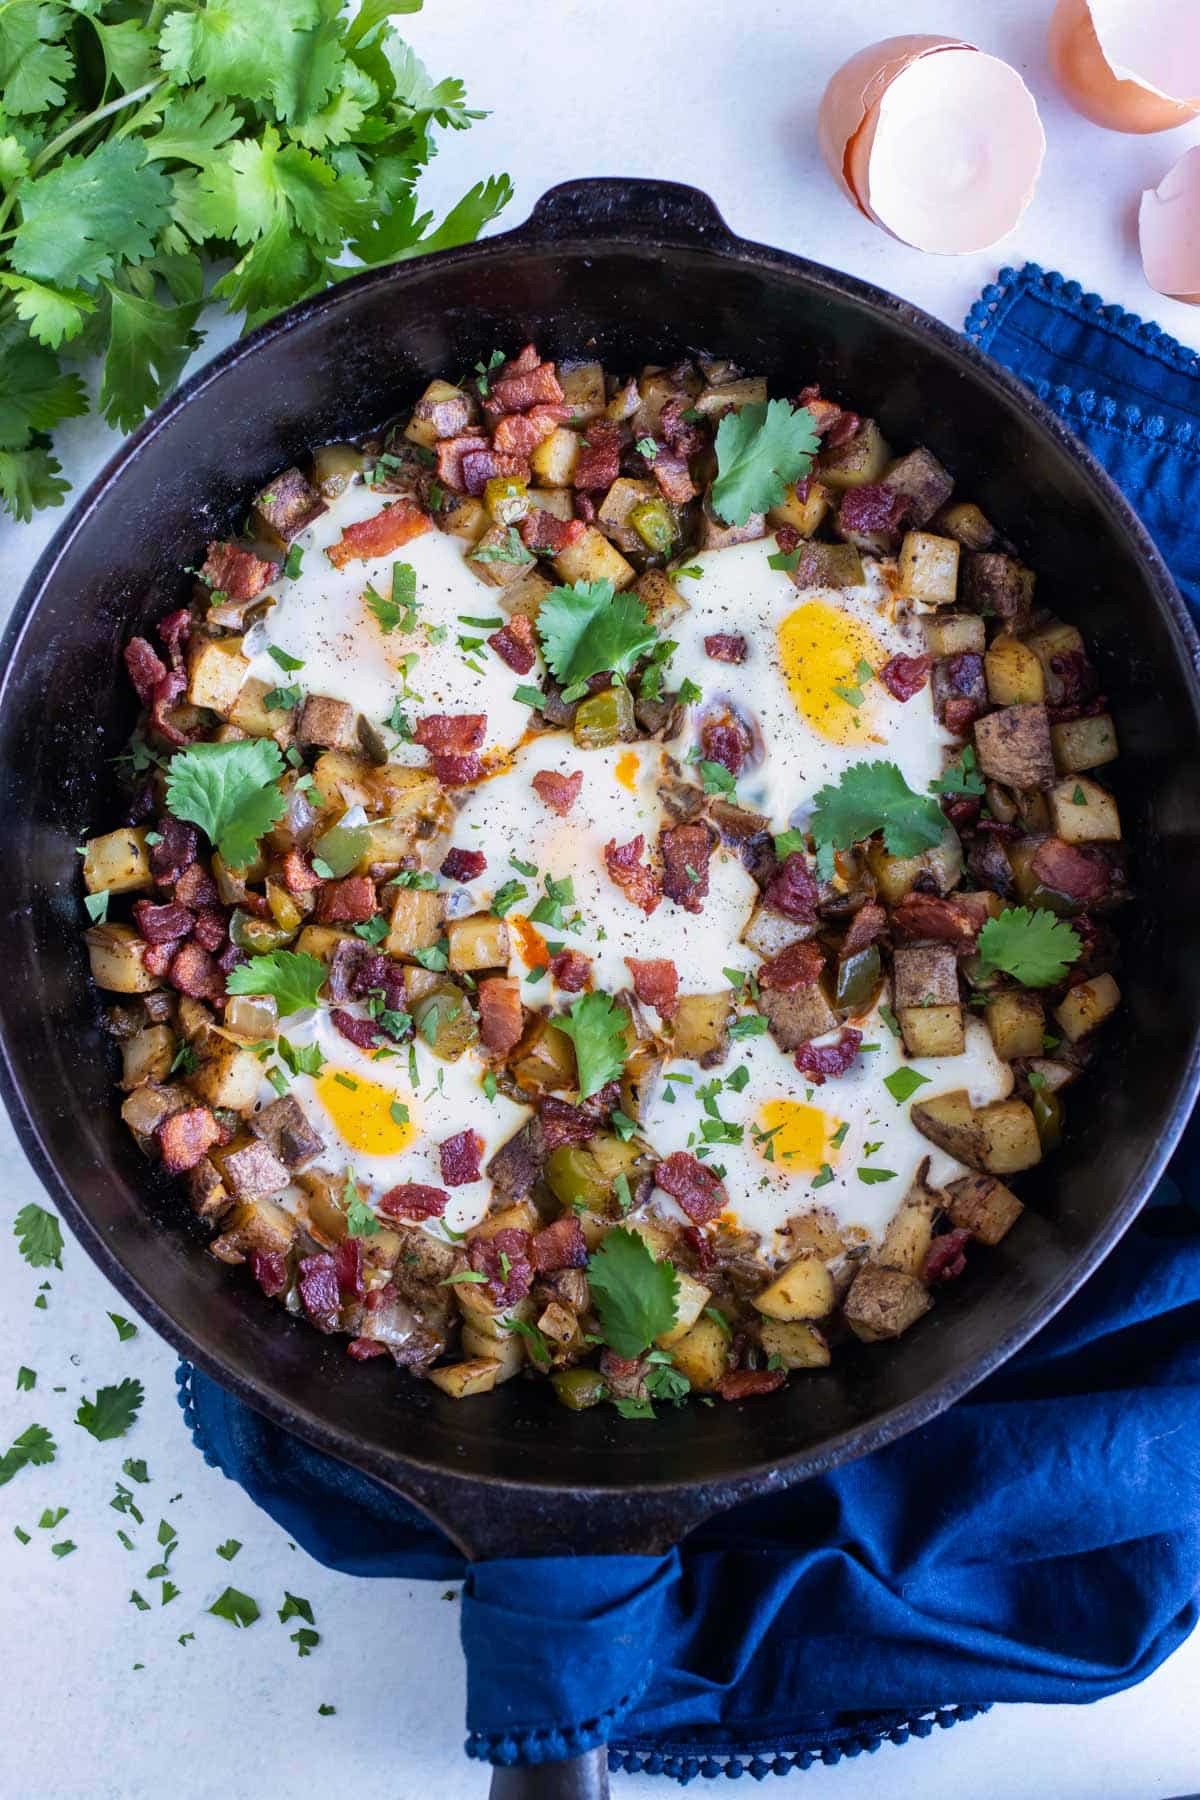 Gluten-free and dairy-free breakfast hash is served from a skillet.